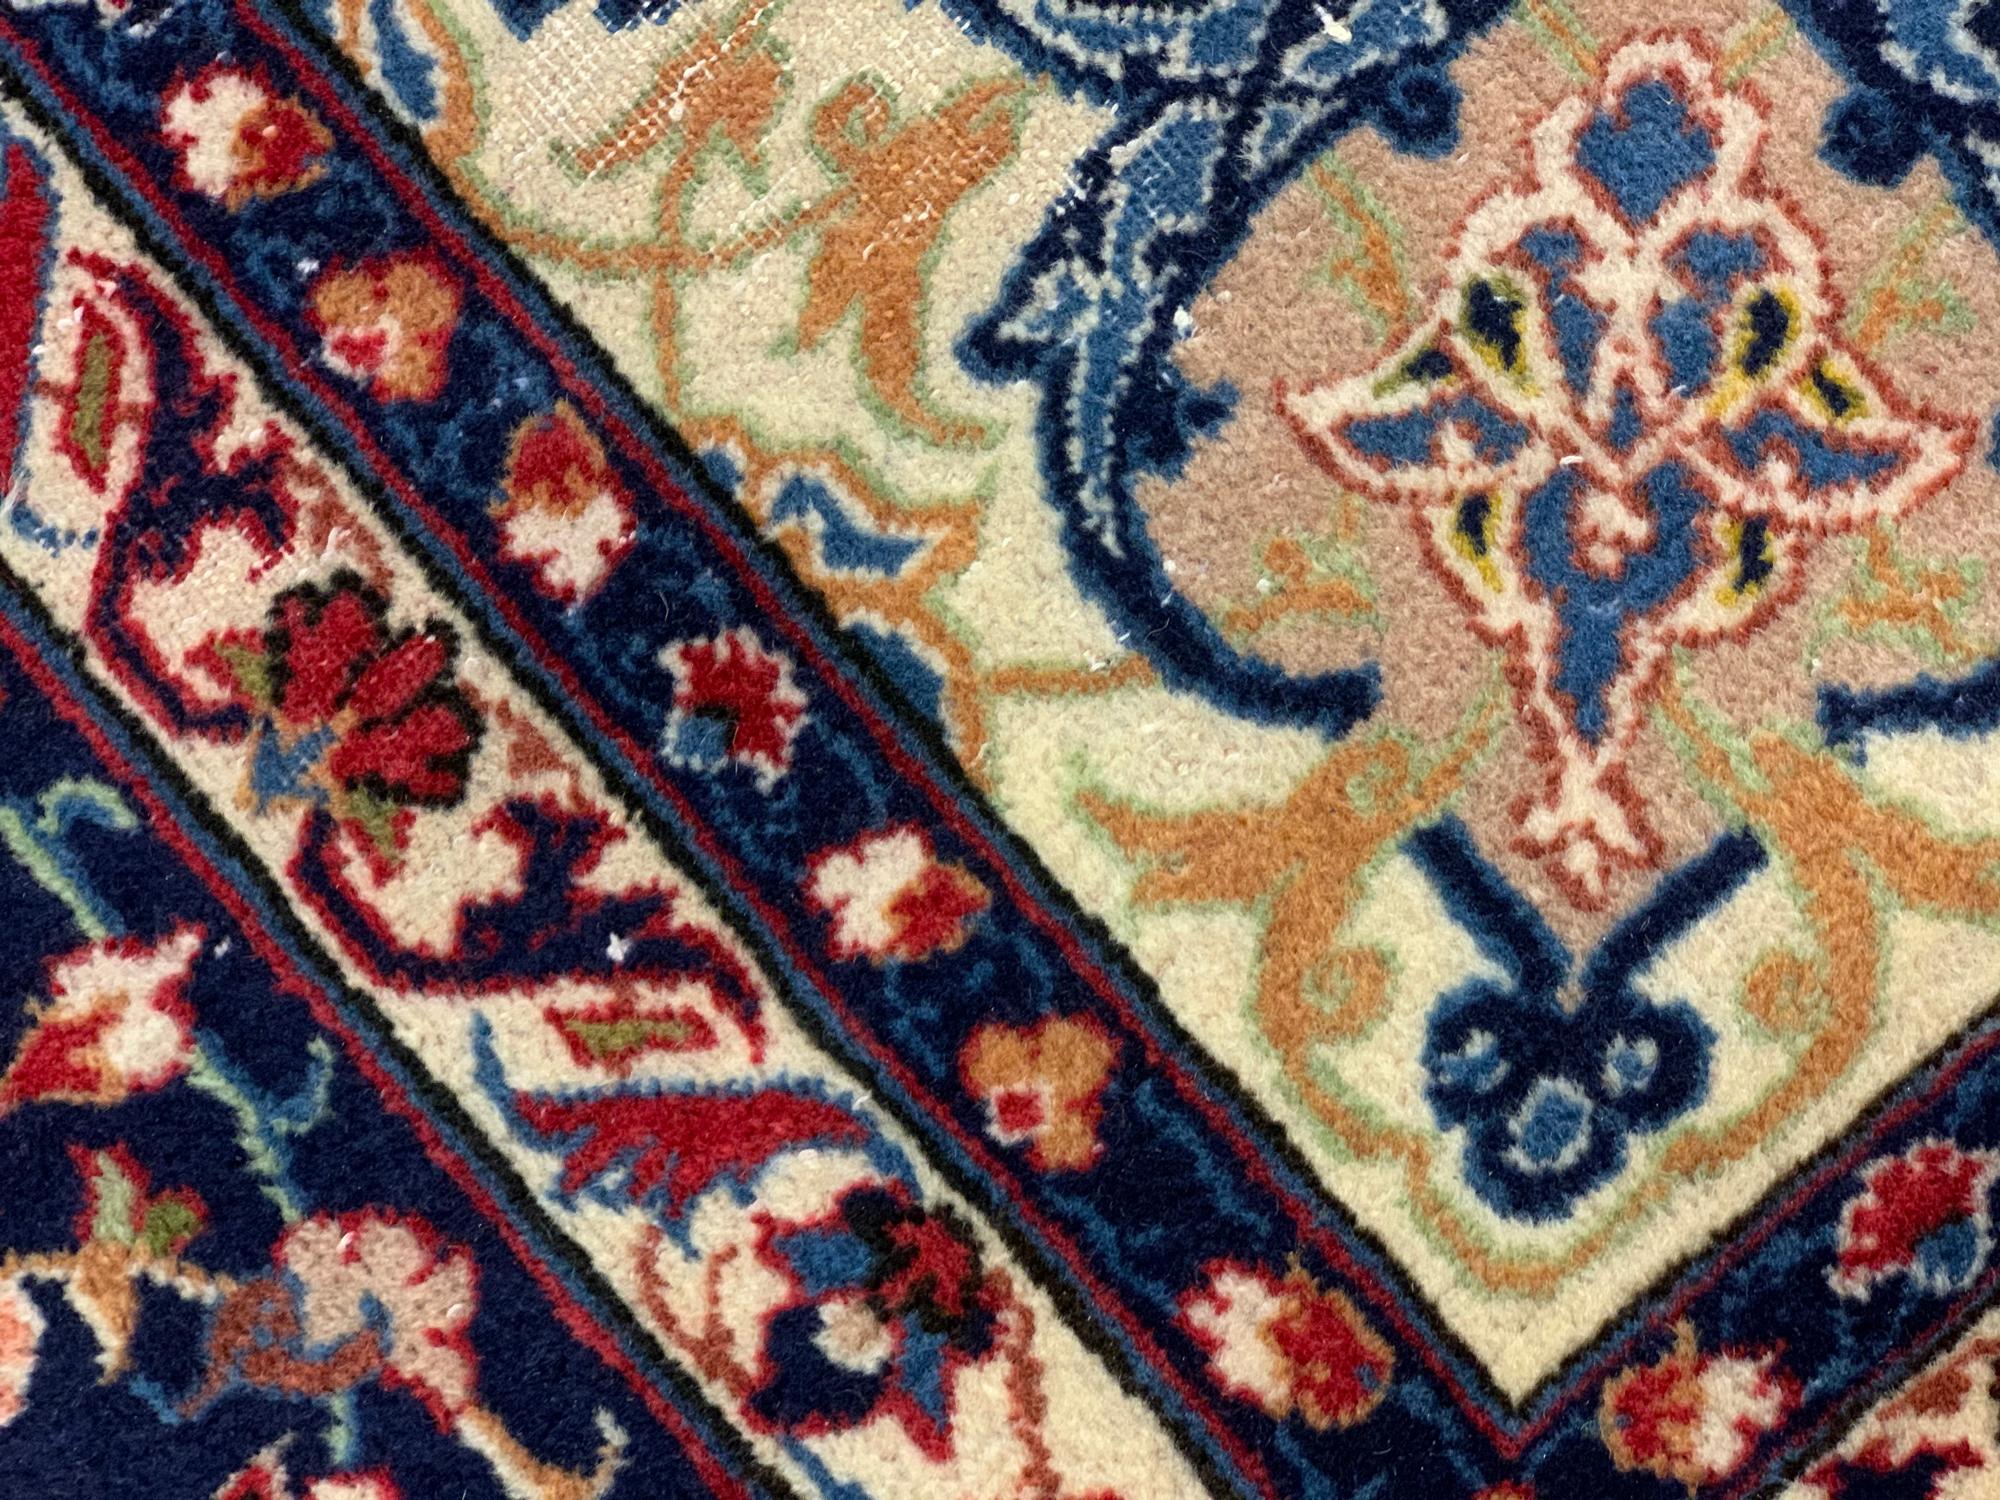 Vintage Wool Area Rug Handwoven Oriental Red Blue Carpet In Excellent Condition For Sale In Hampshire, GB